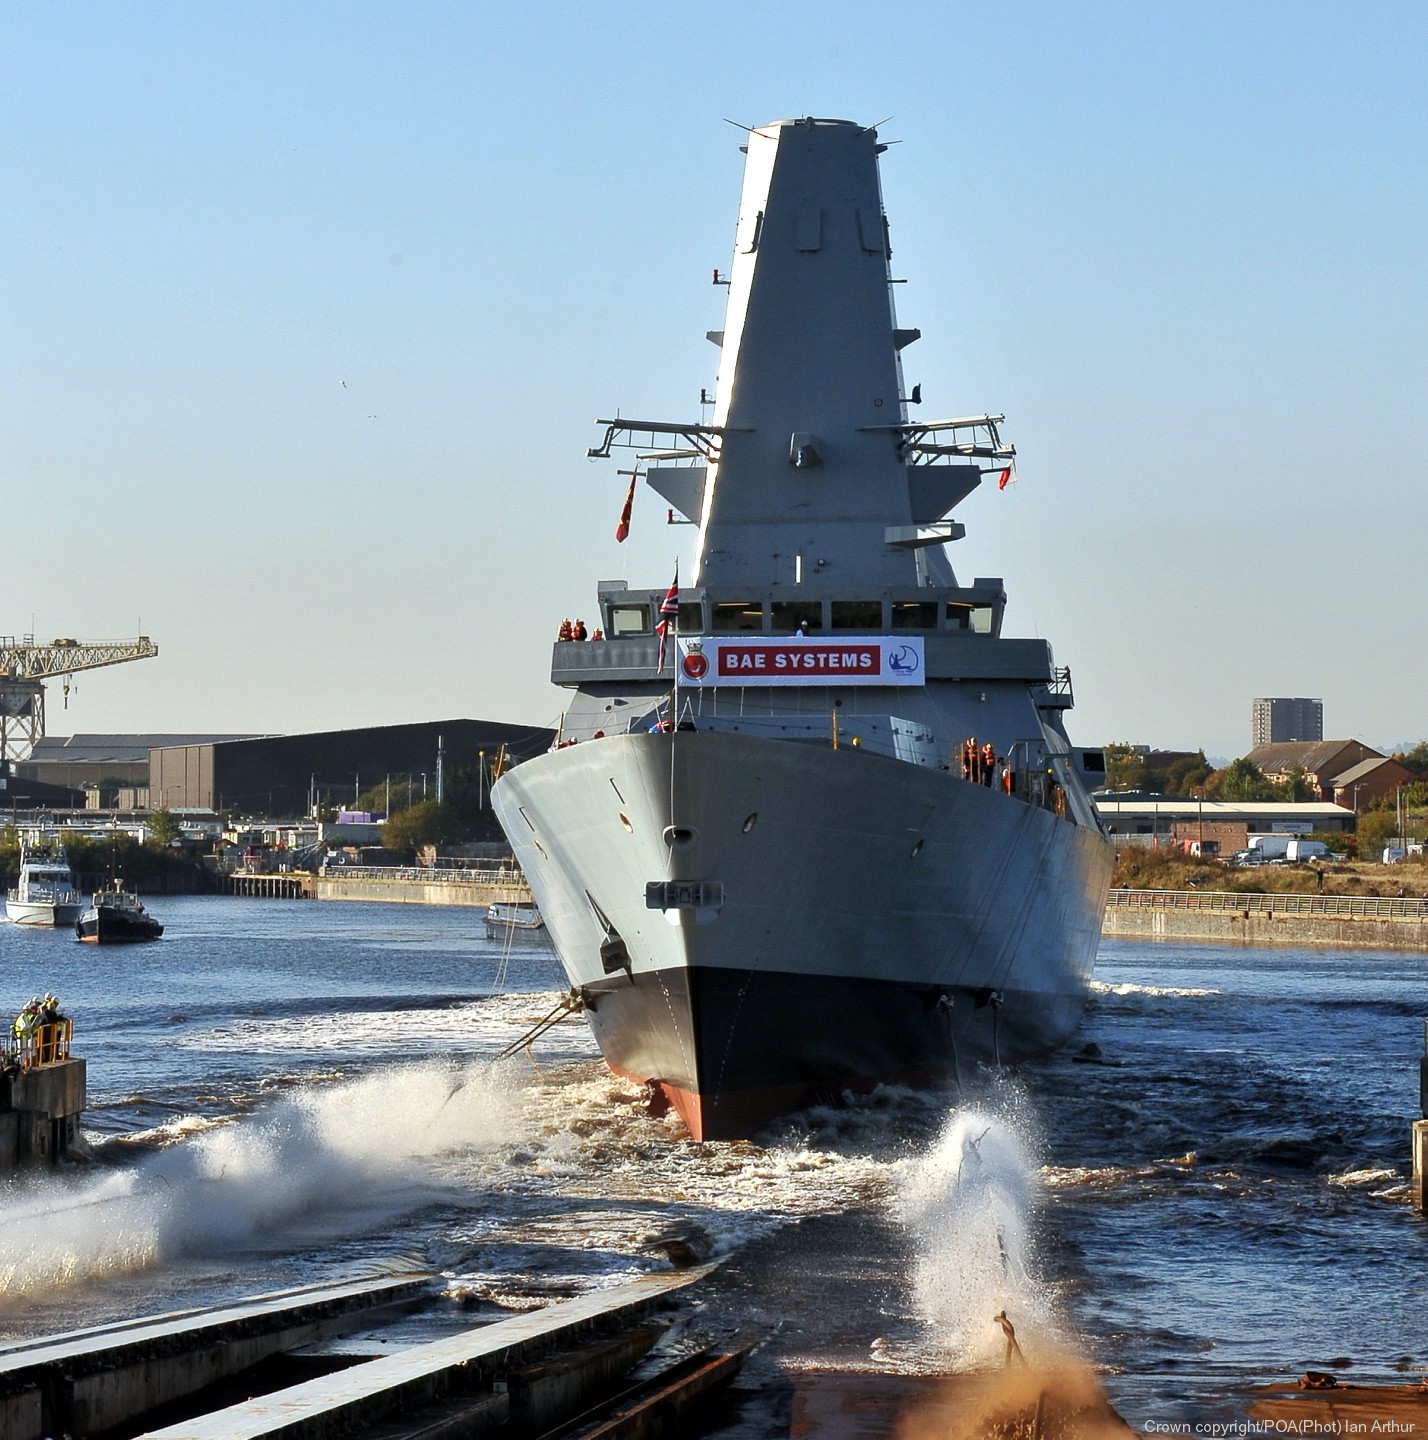 hms duncan d-37 type 45 daring class guided missile destroyer ddg royal navy sea viper paams 14 launching